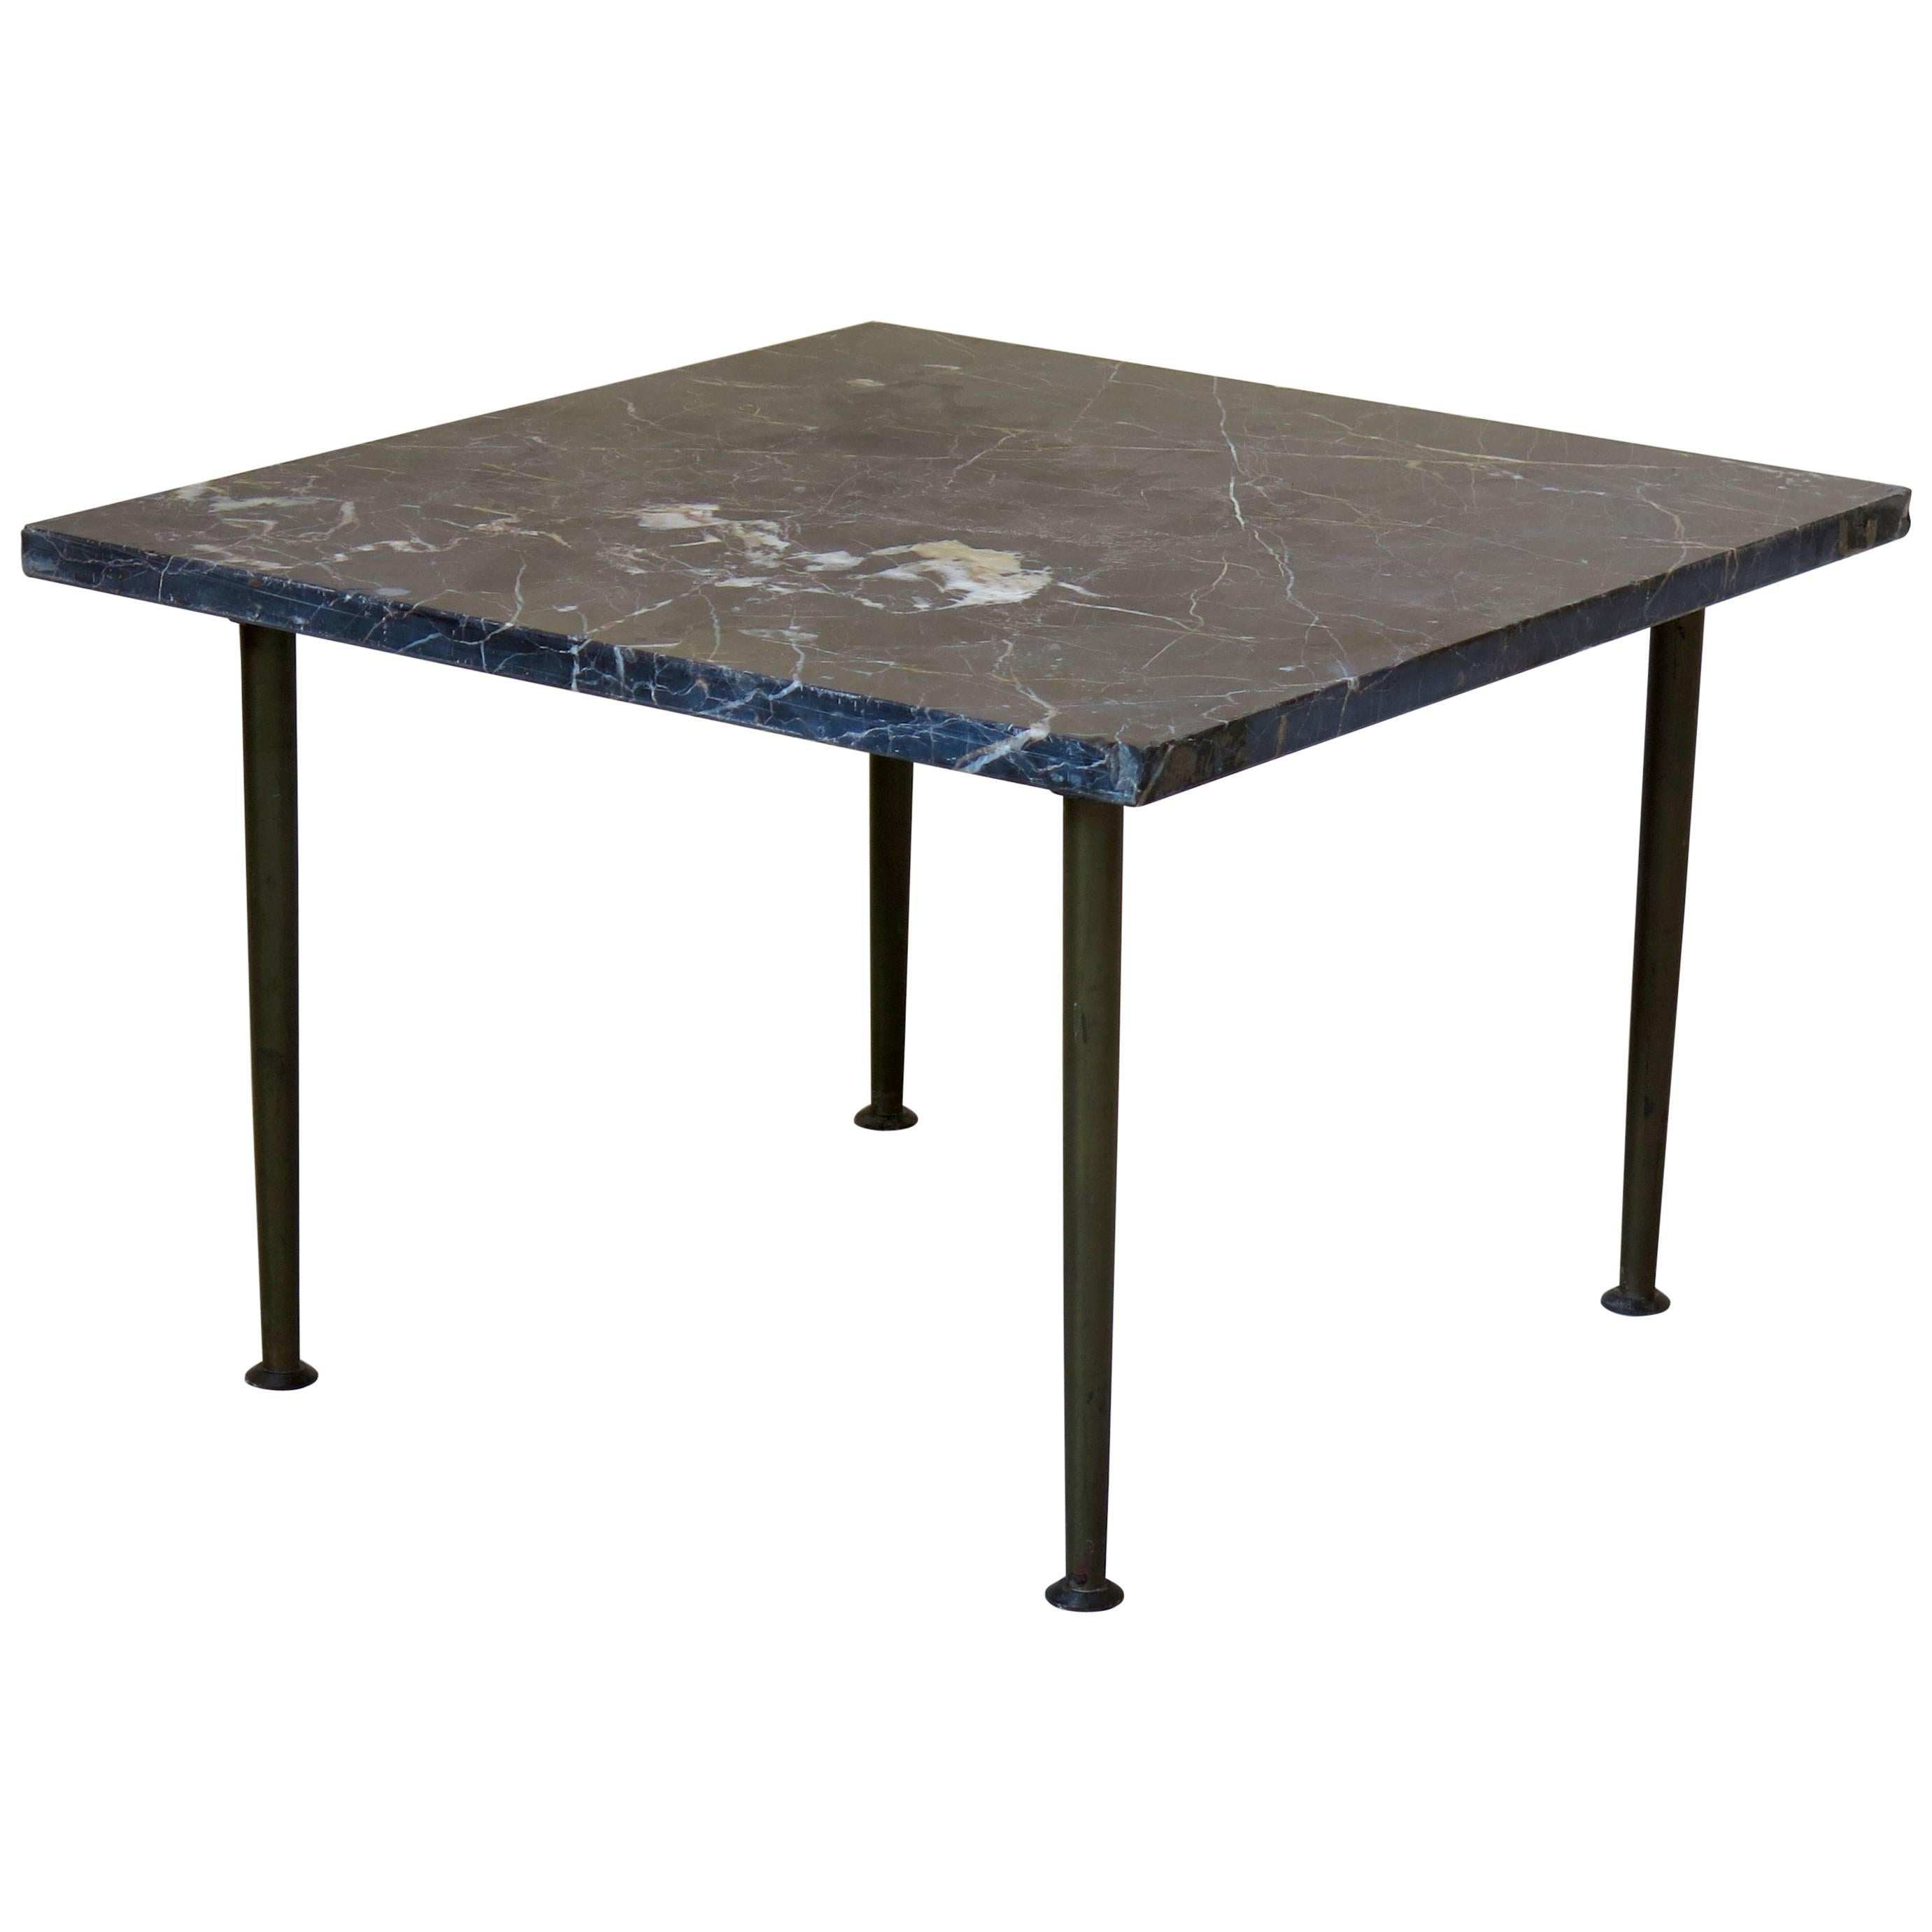 Small Square Bronze and Black Marble Coffee Table, France, circa 1950s